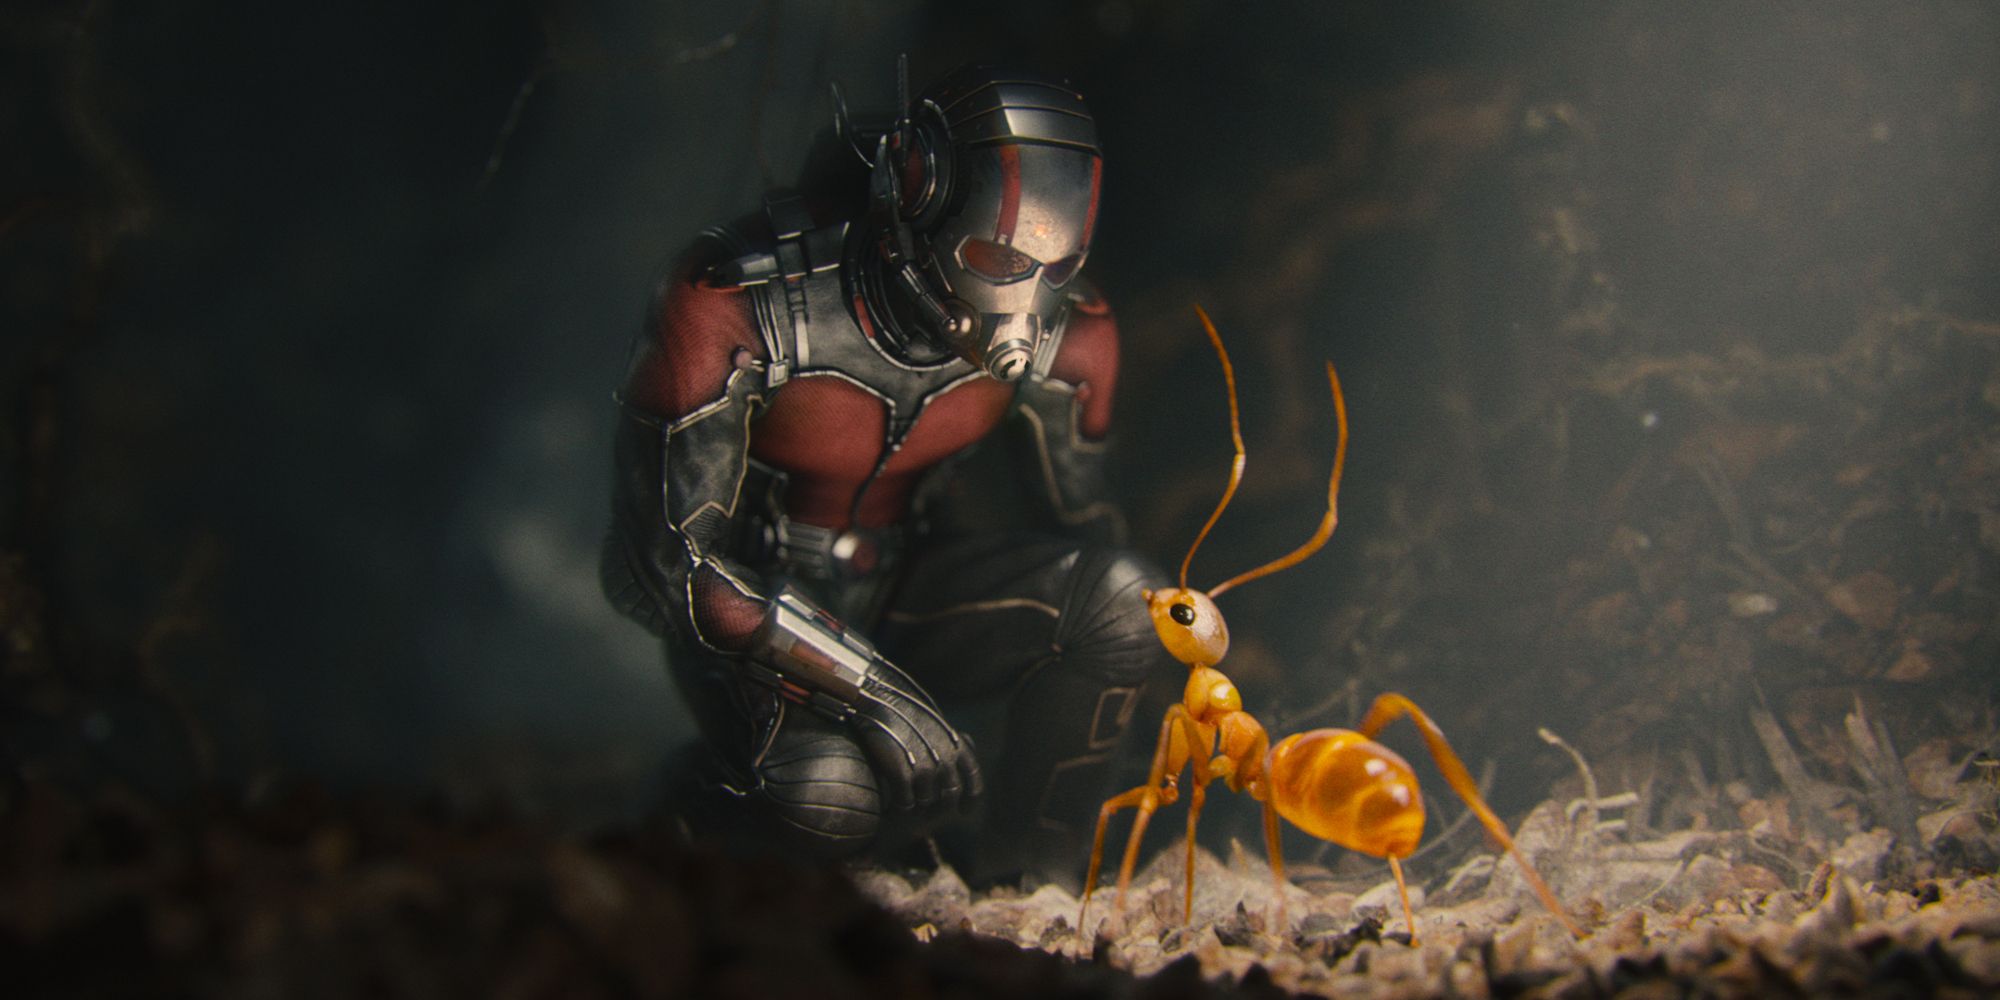 Scott Lang meeting one of the crazy ants in Ant-Man (2015)